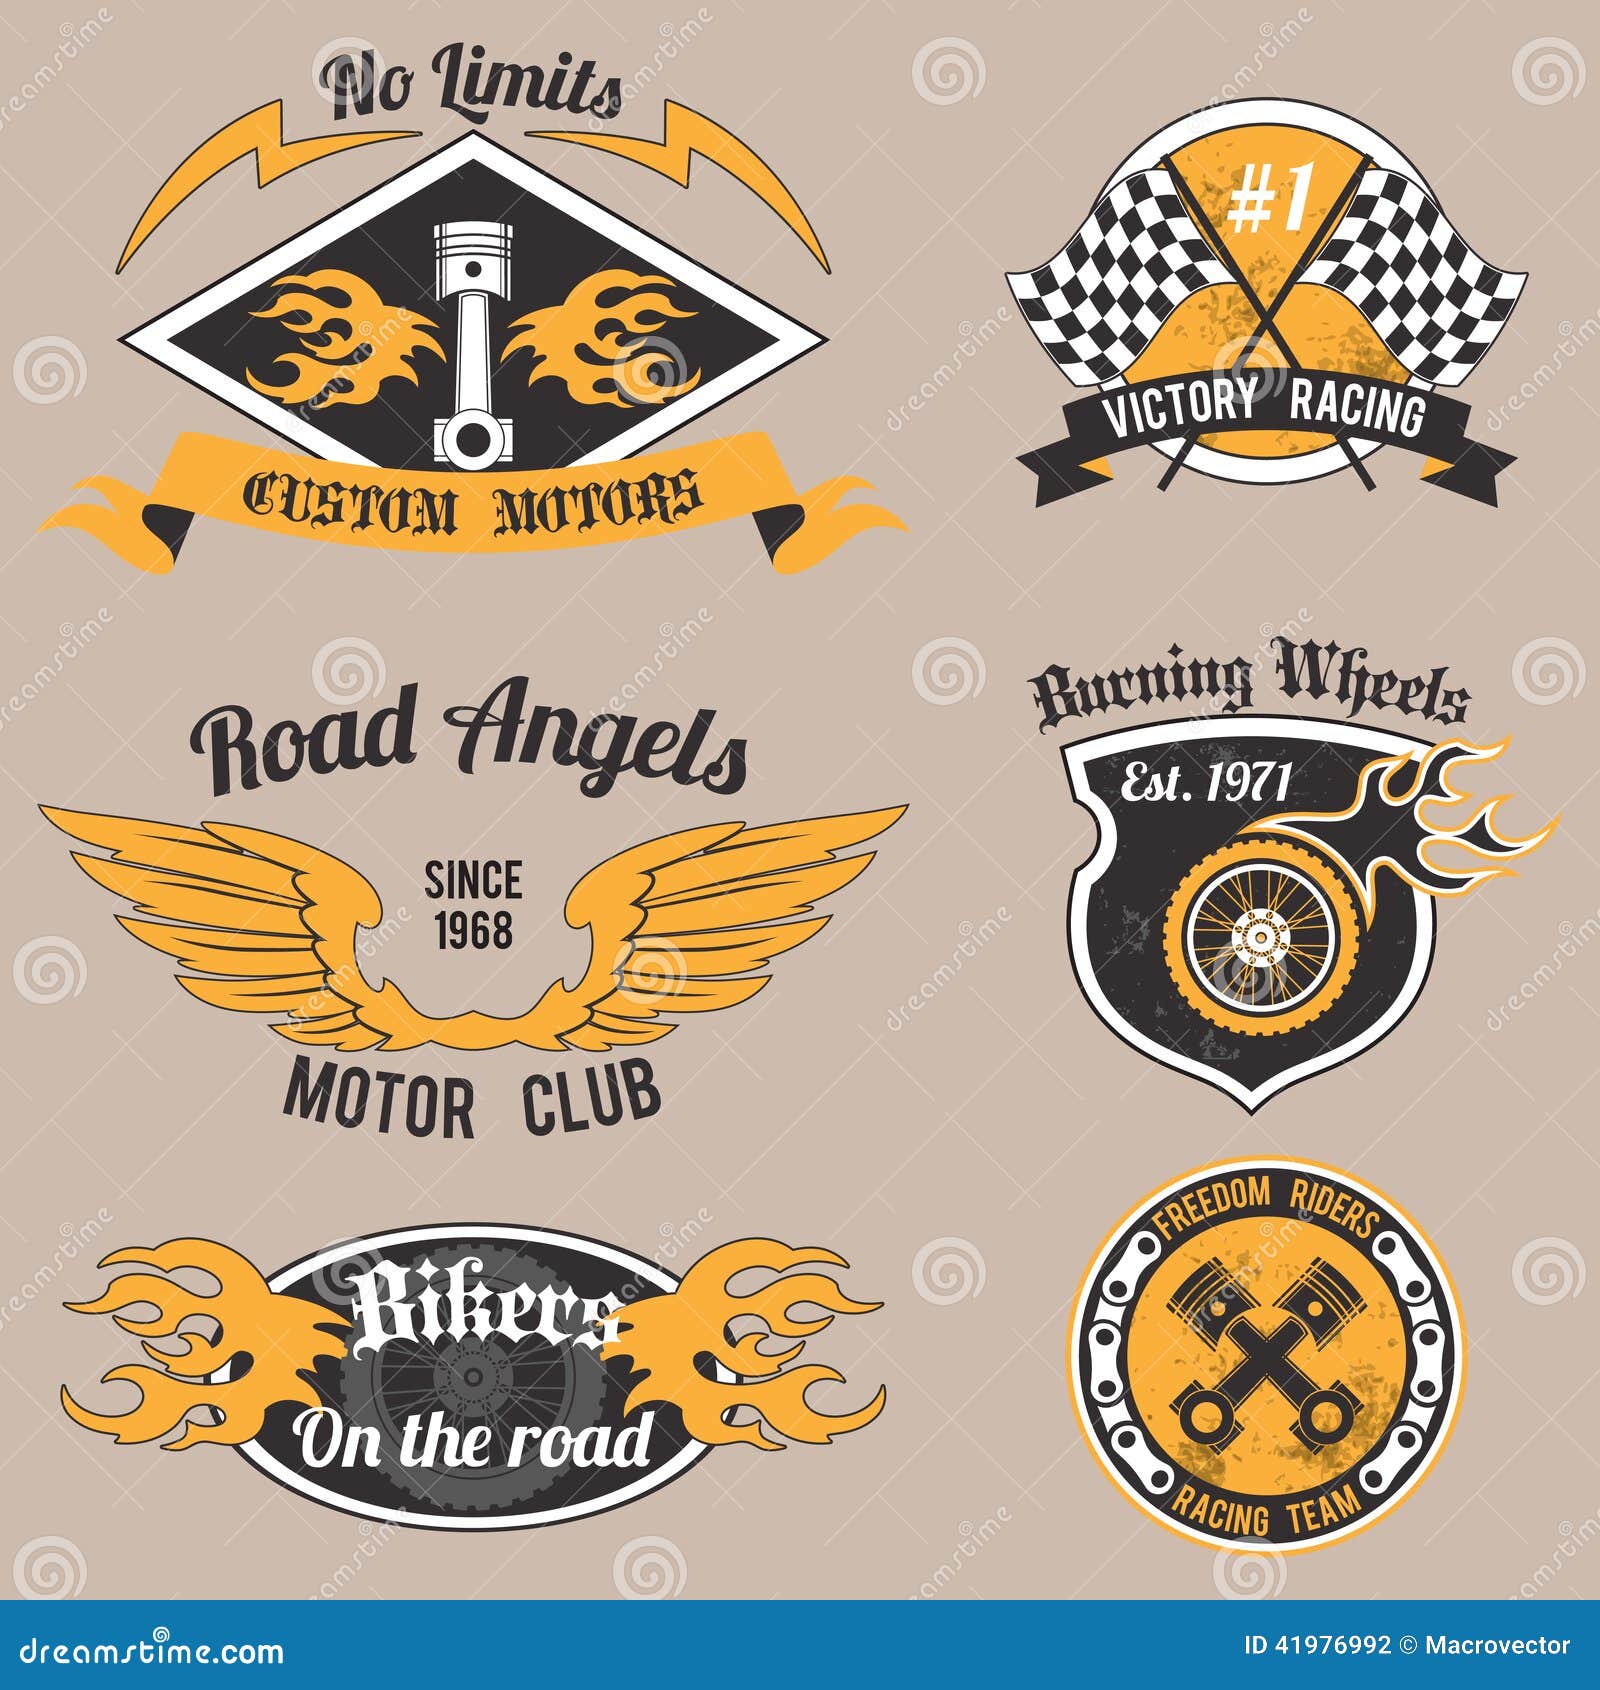 Motorcycle design badges stock vector Illustration of 